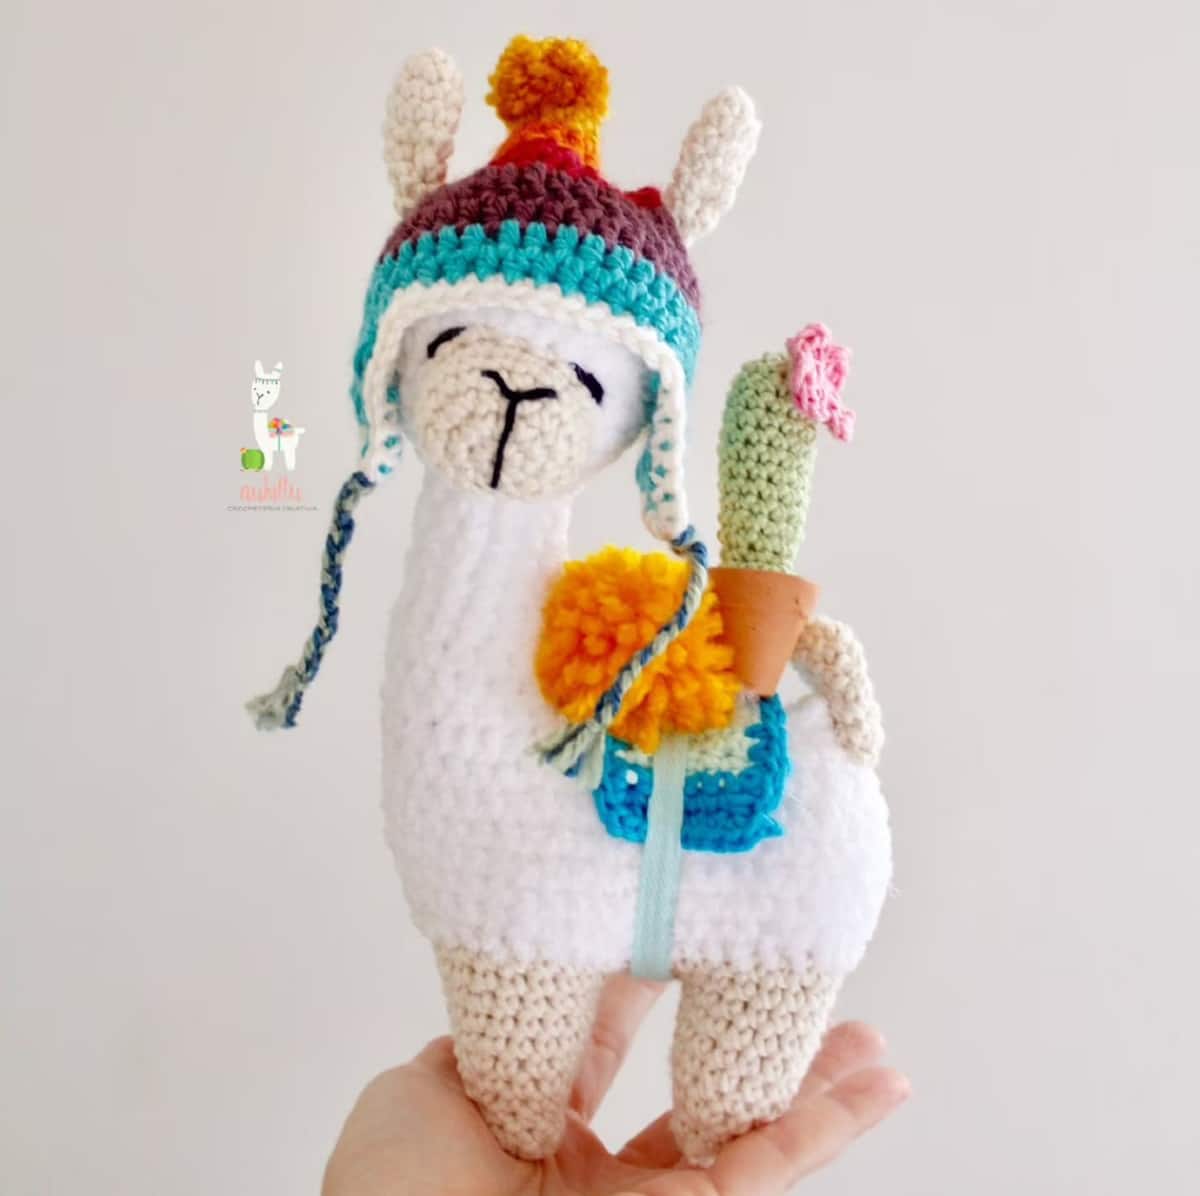 White crochet llama wearing a blue and brown hat with braids either side, a blue seat around its middle with a cactus and orange flowers standing on its back.